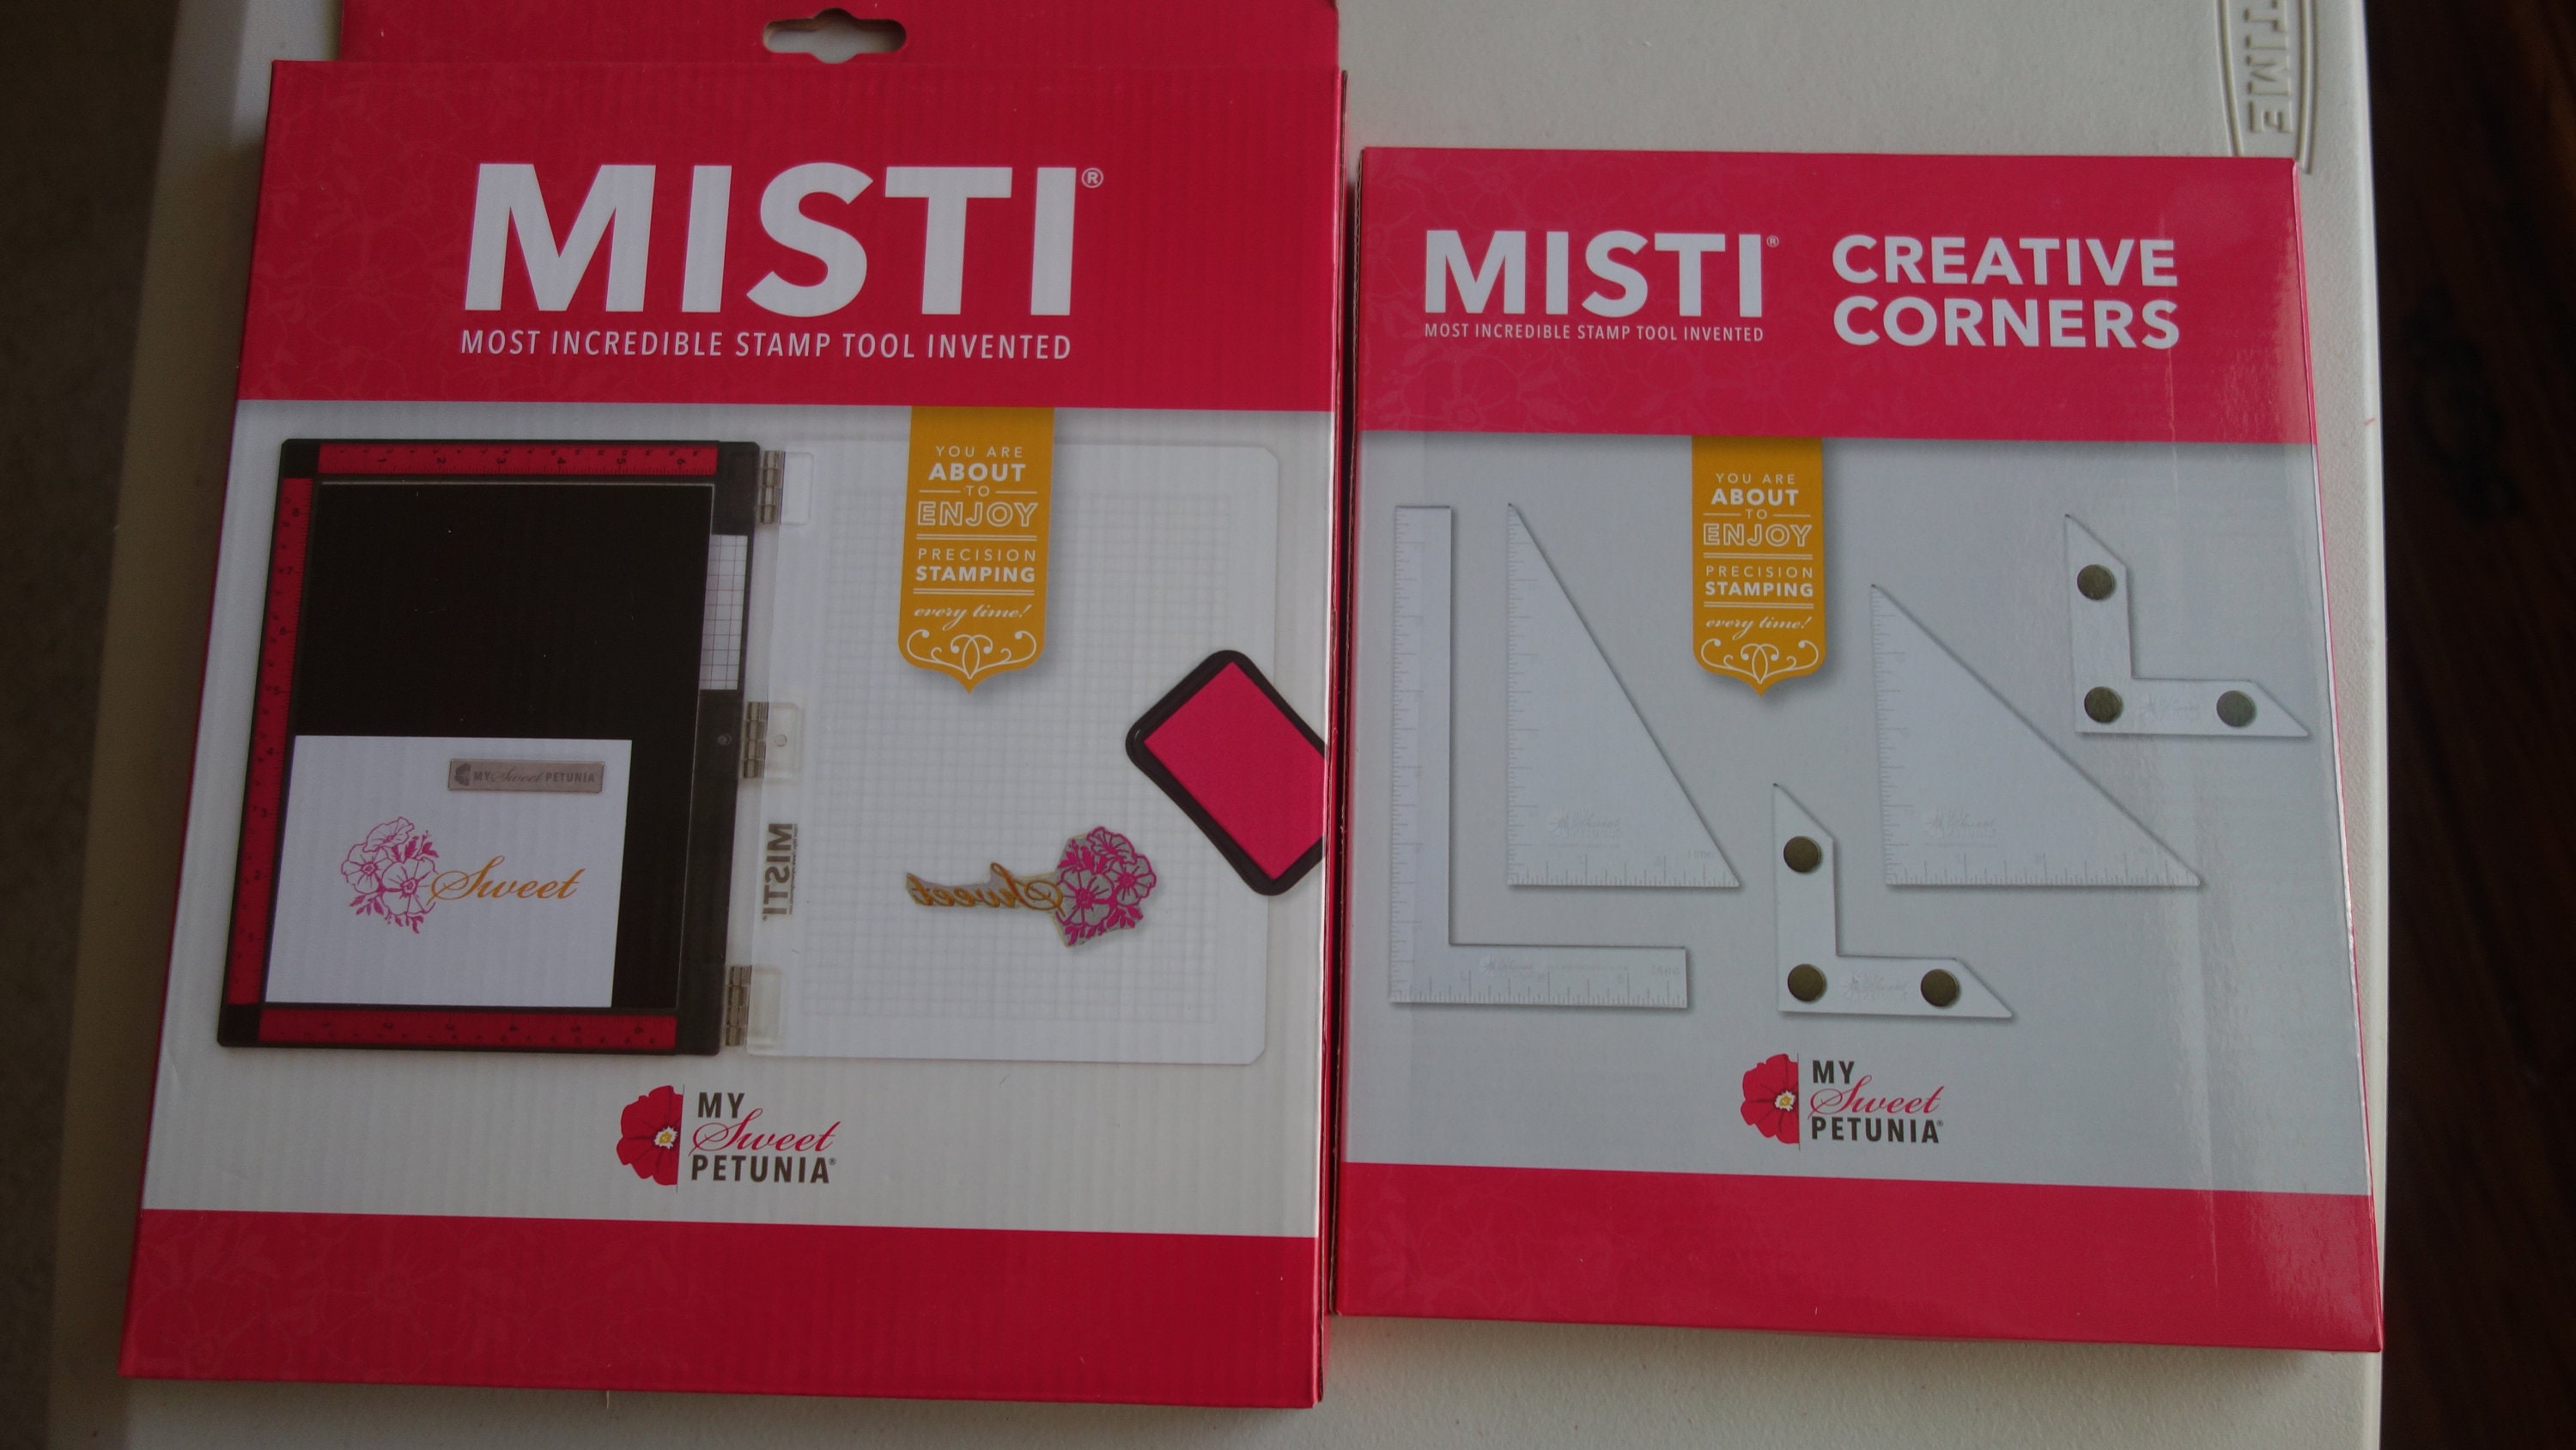 Mini Misti Stamp Tool - The Most Incredible Stamp Tool Invented 